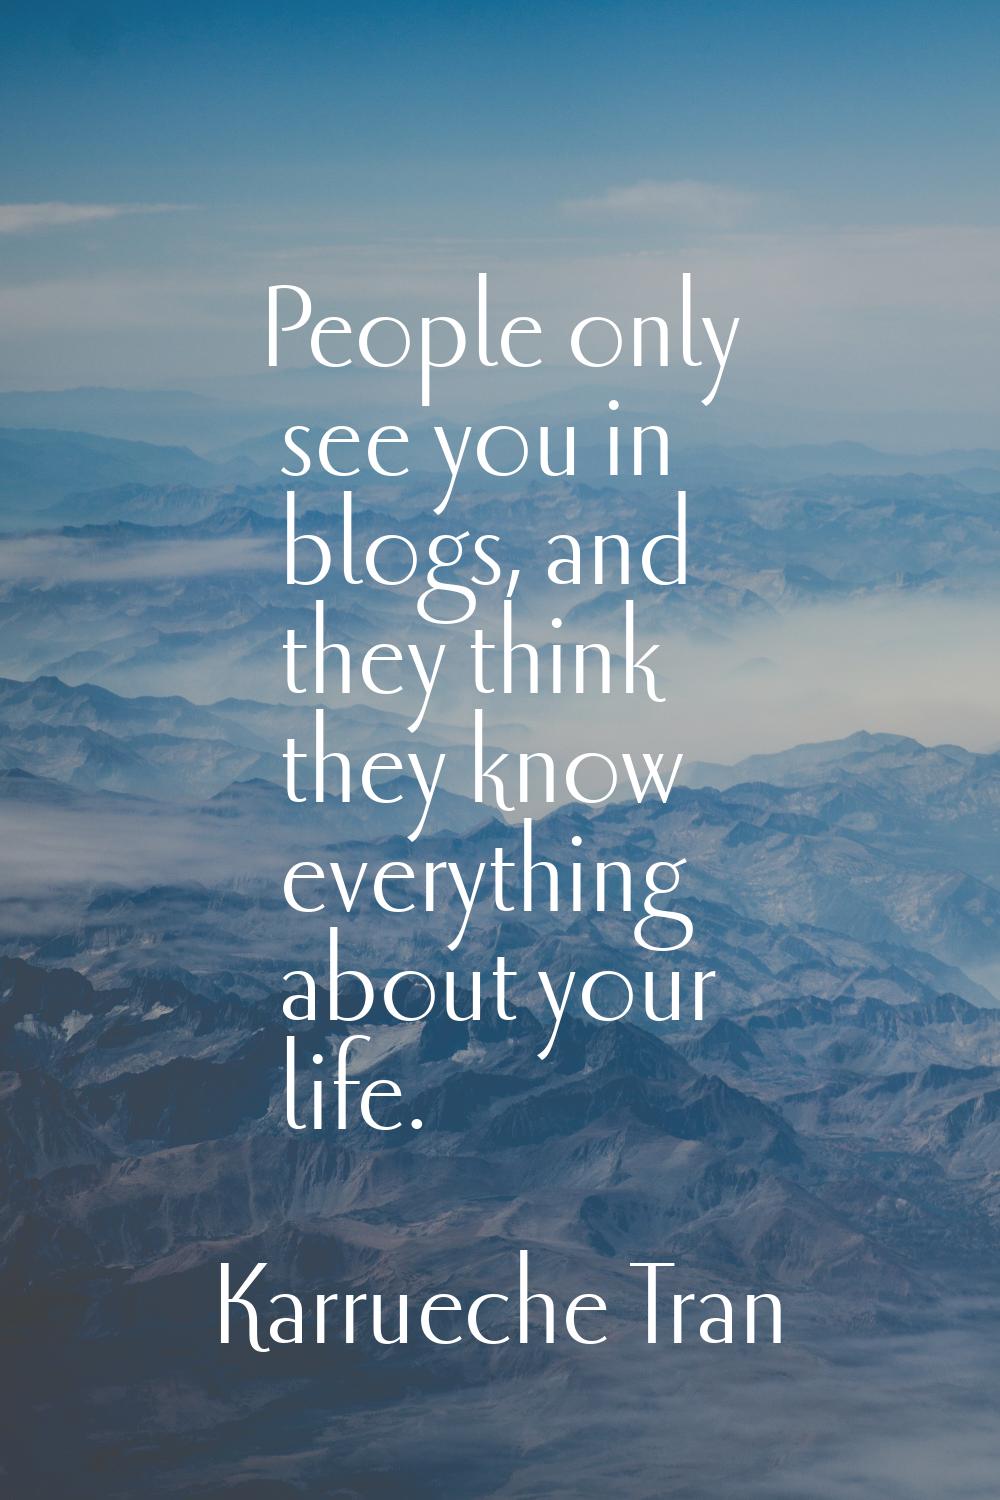 People only see you in blogs, and they think they know everything about your life.